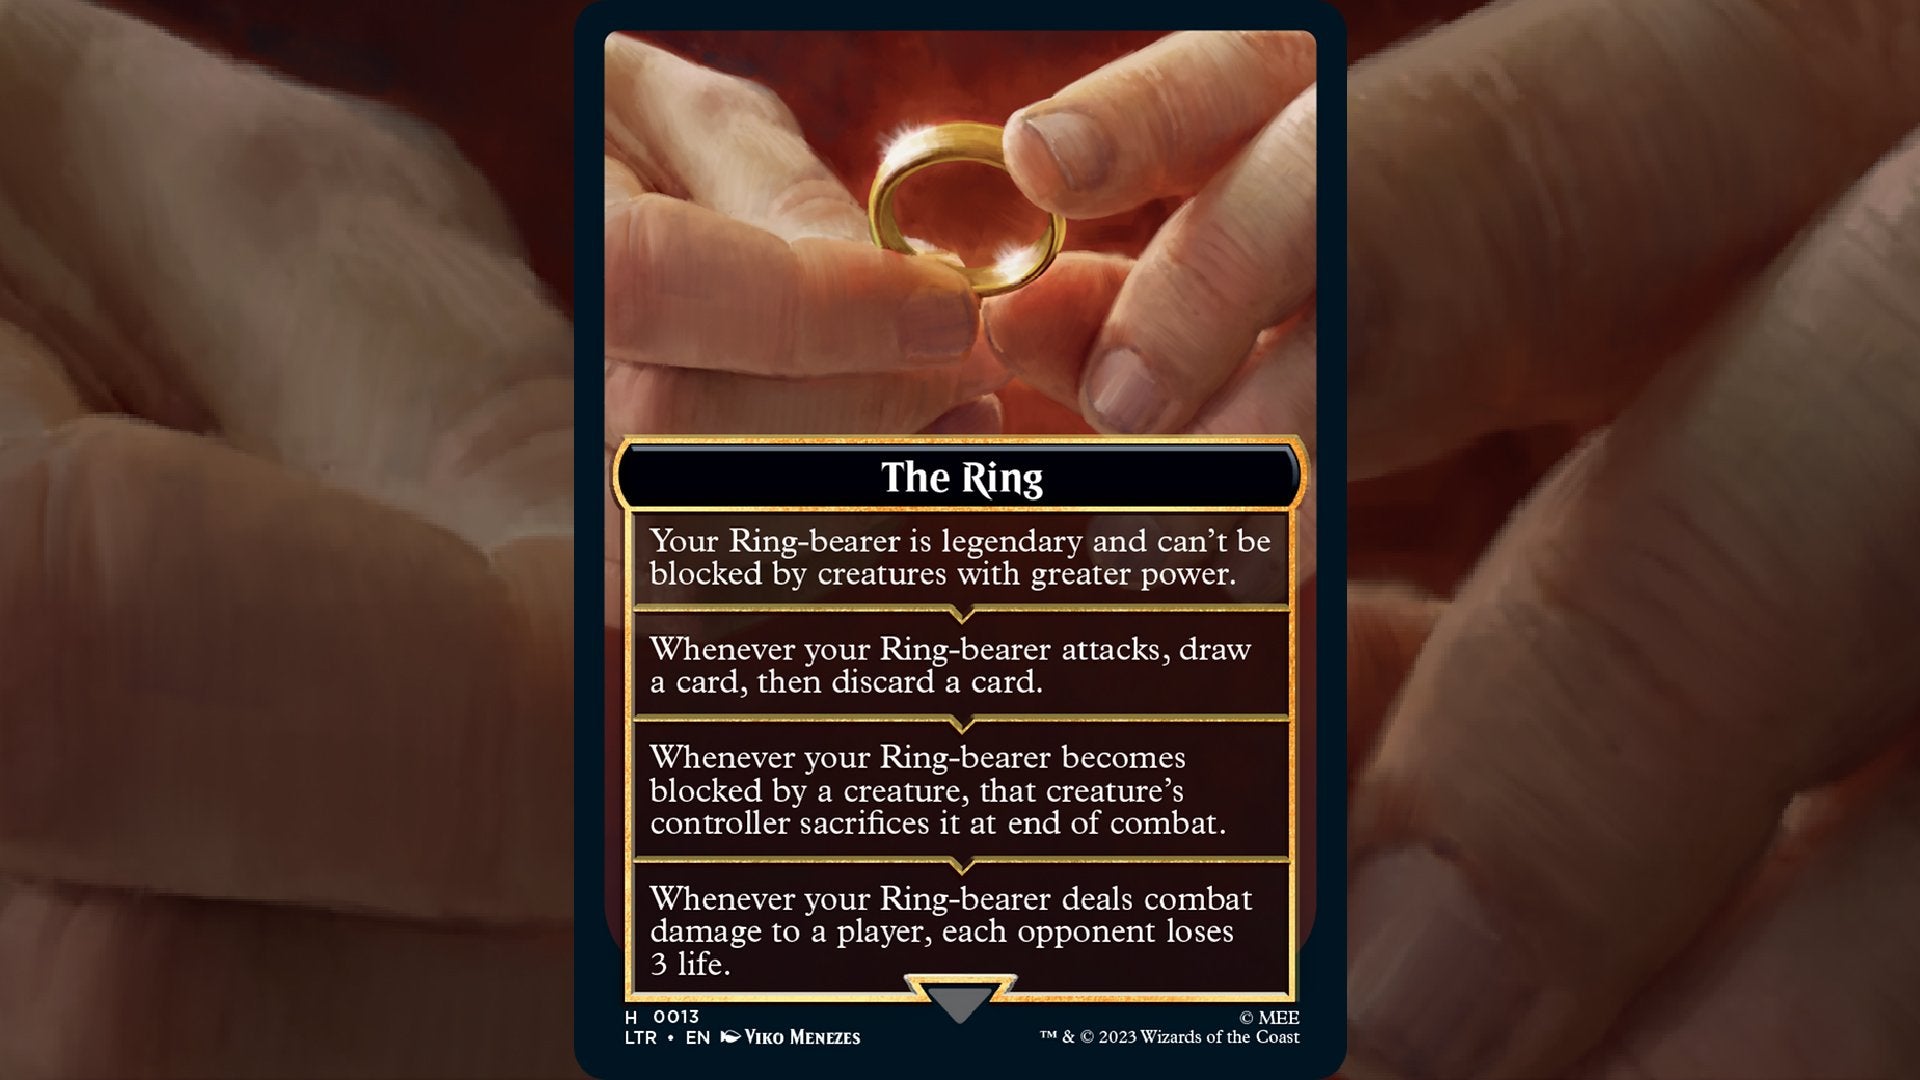 The Ring emblem from MTG showing two hands holding The One Ring and listing its effects below.